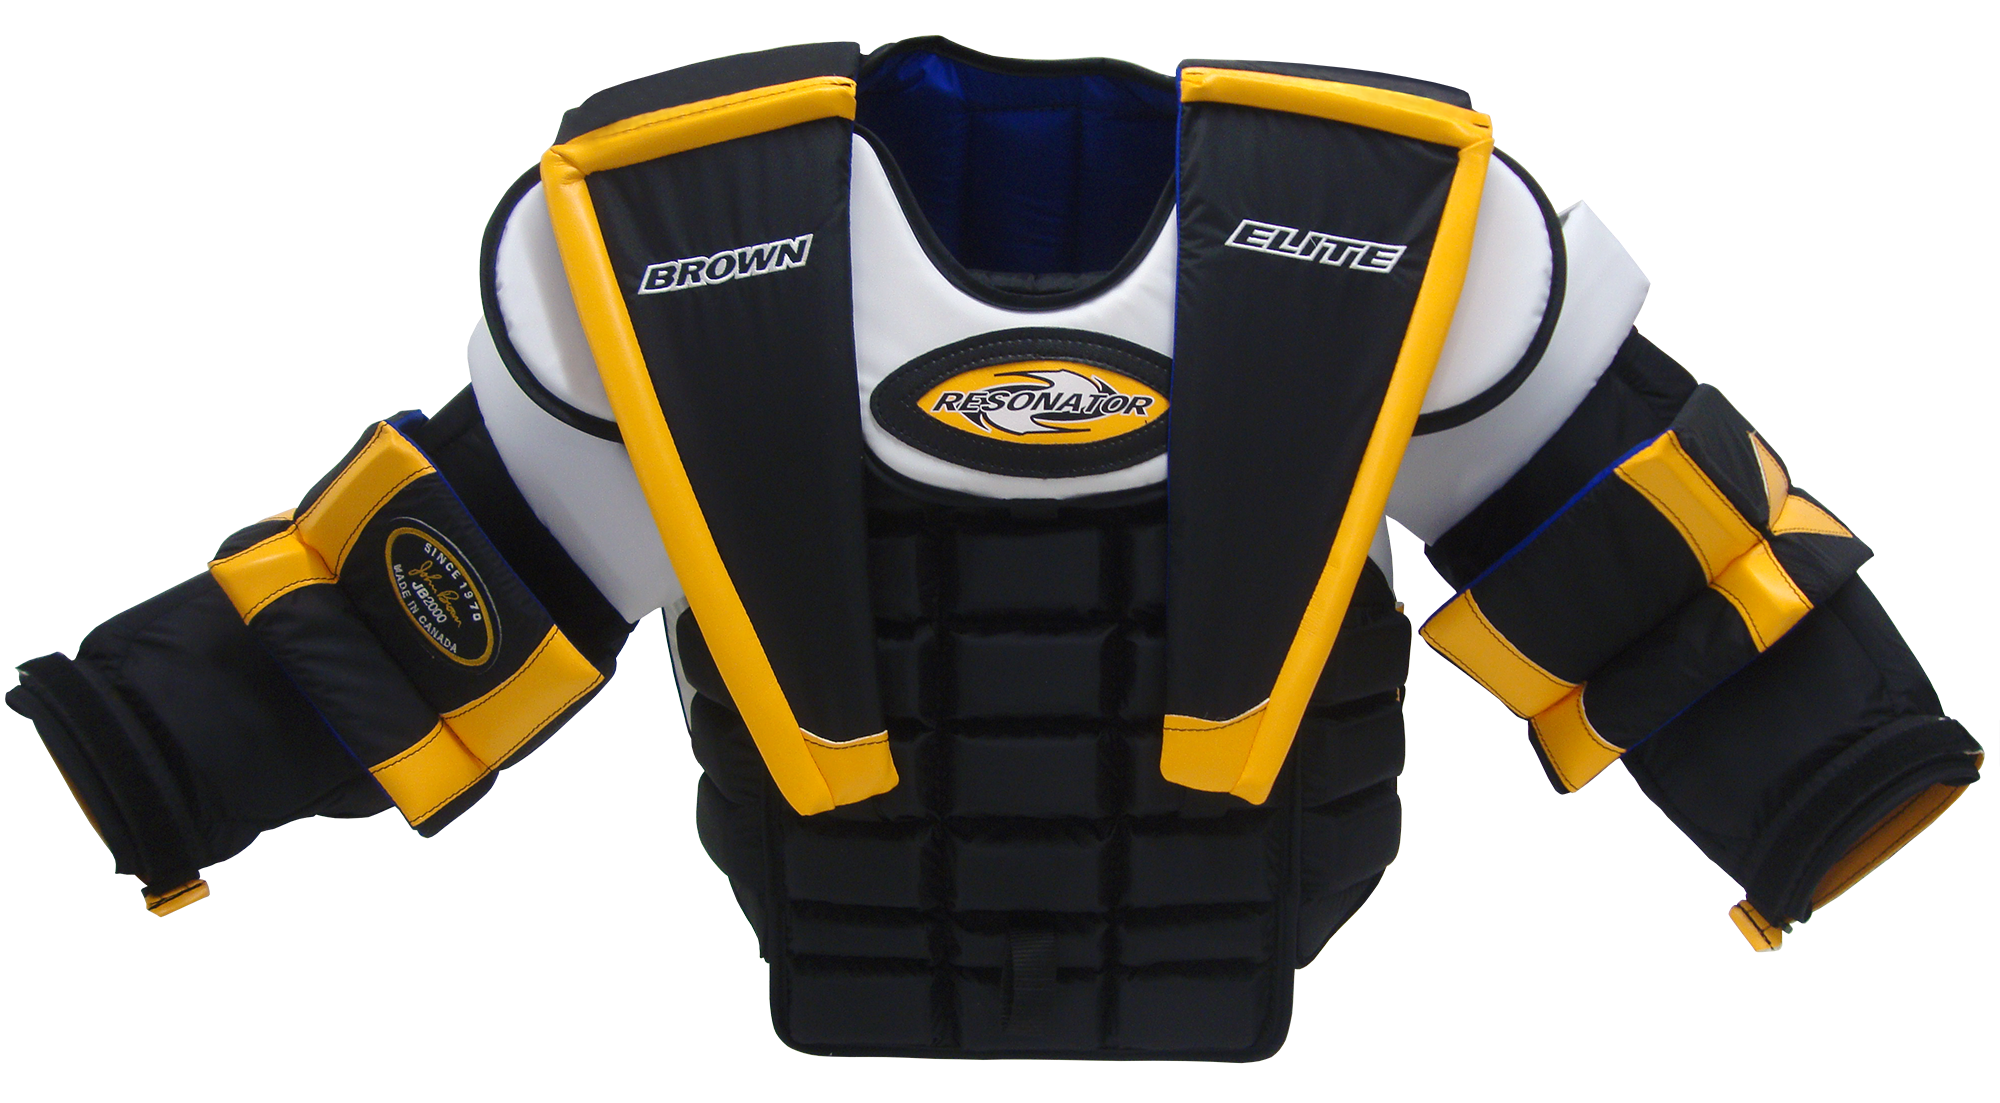 Front view of 2000 chest protector